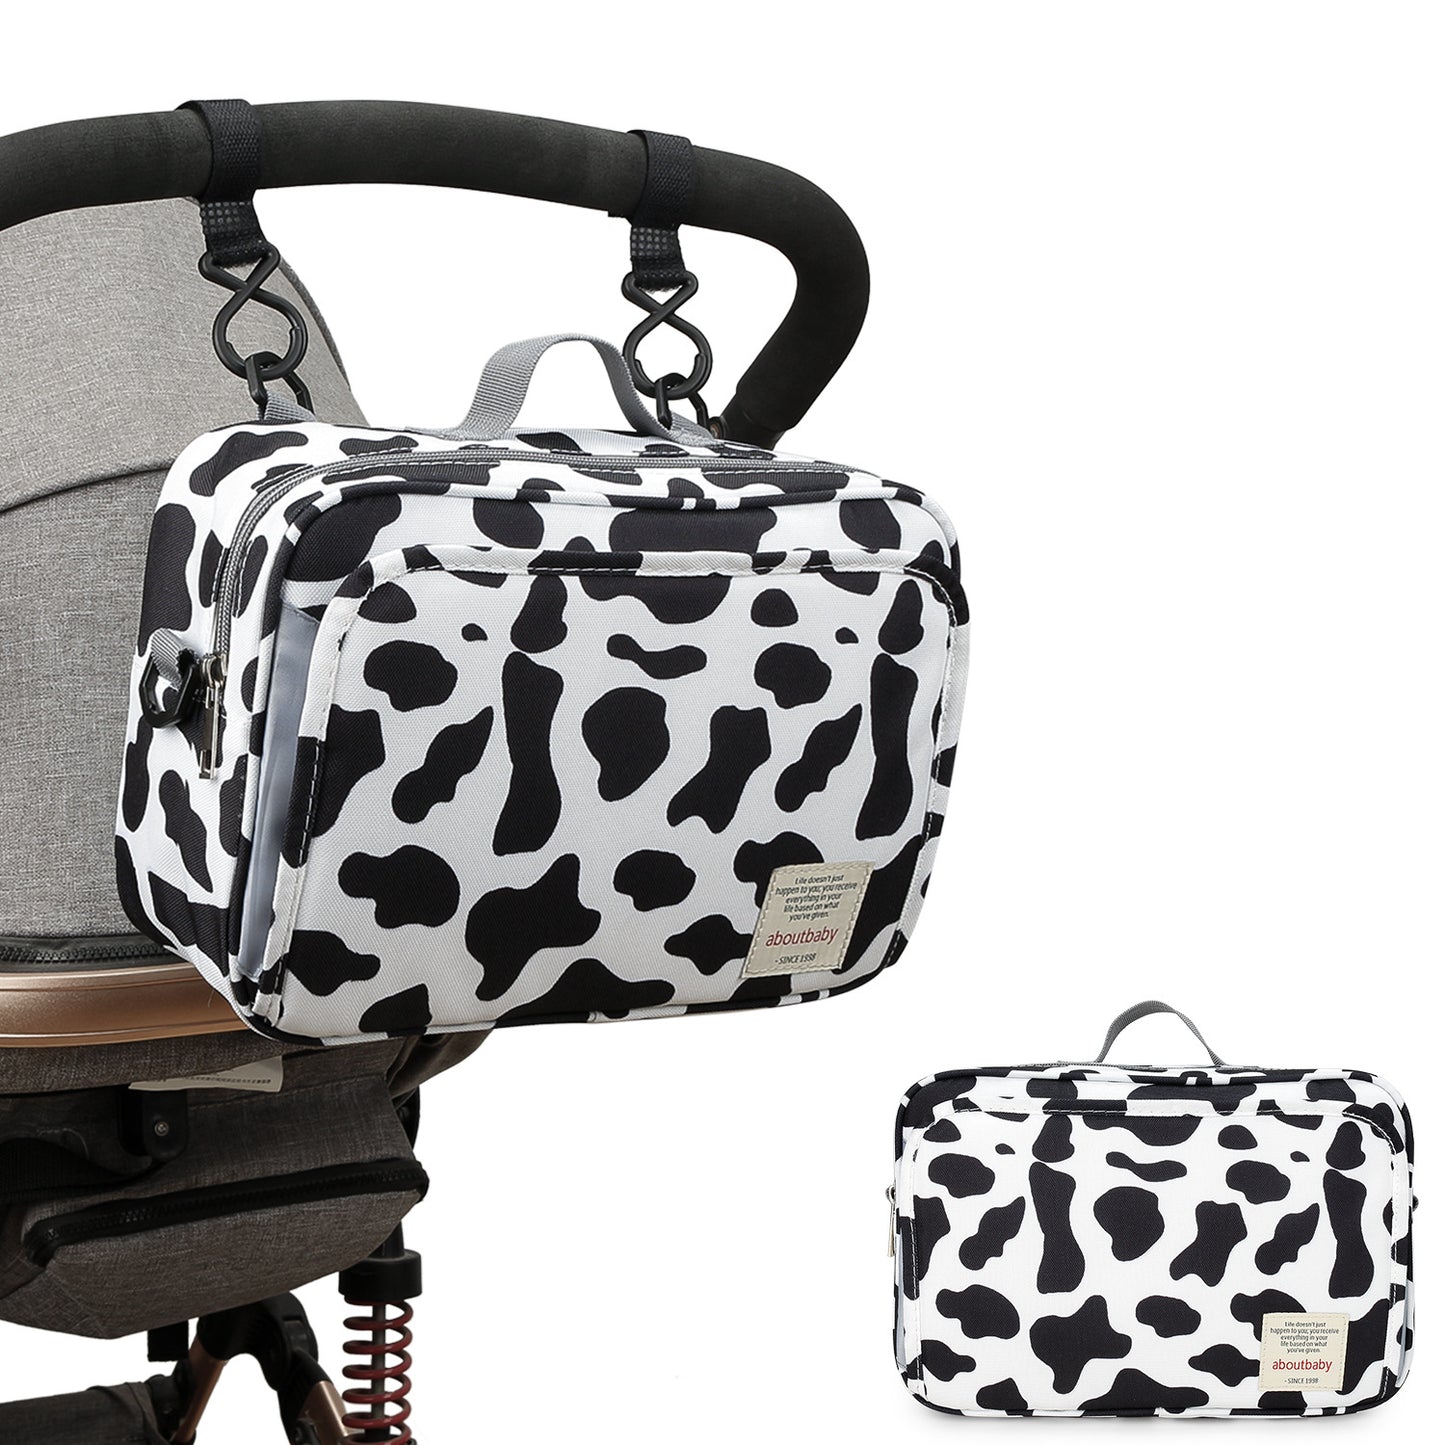 2 Ways Baby Diaper Bag Stroller Bag - Diaper Caddy Tote Baby Stroller Bag for Diapers Wipes Toys,Nappy Bags